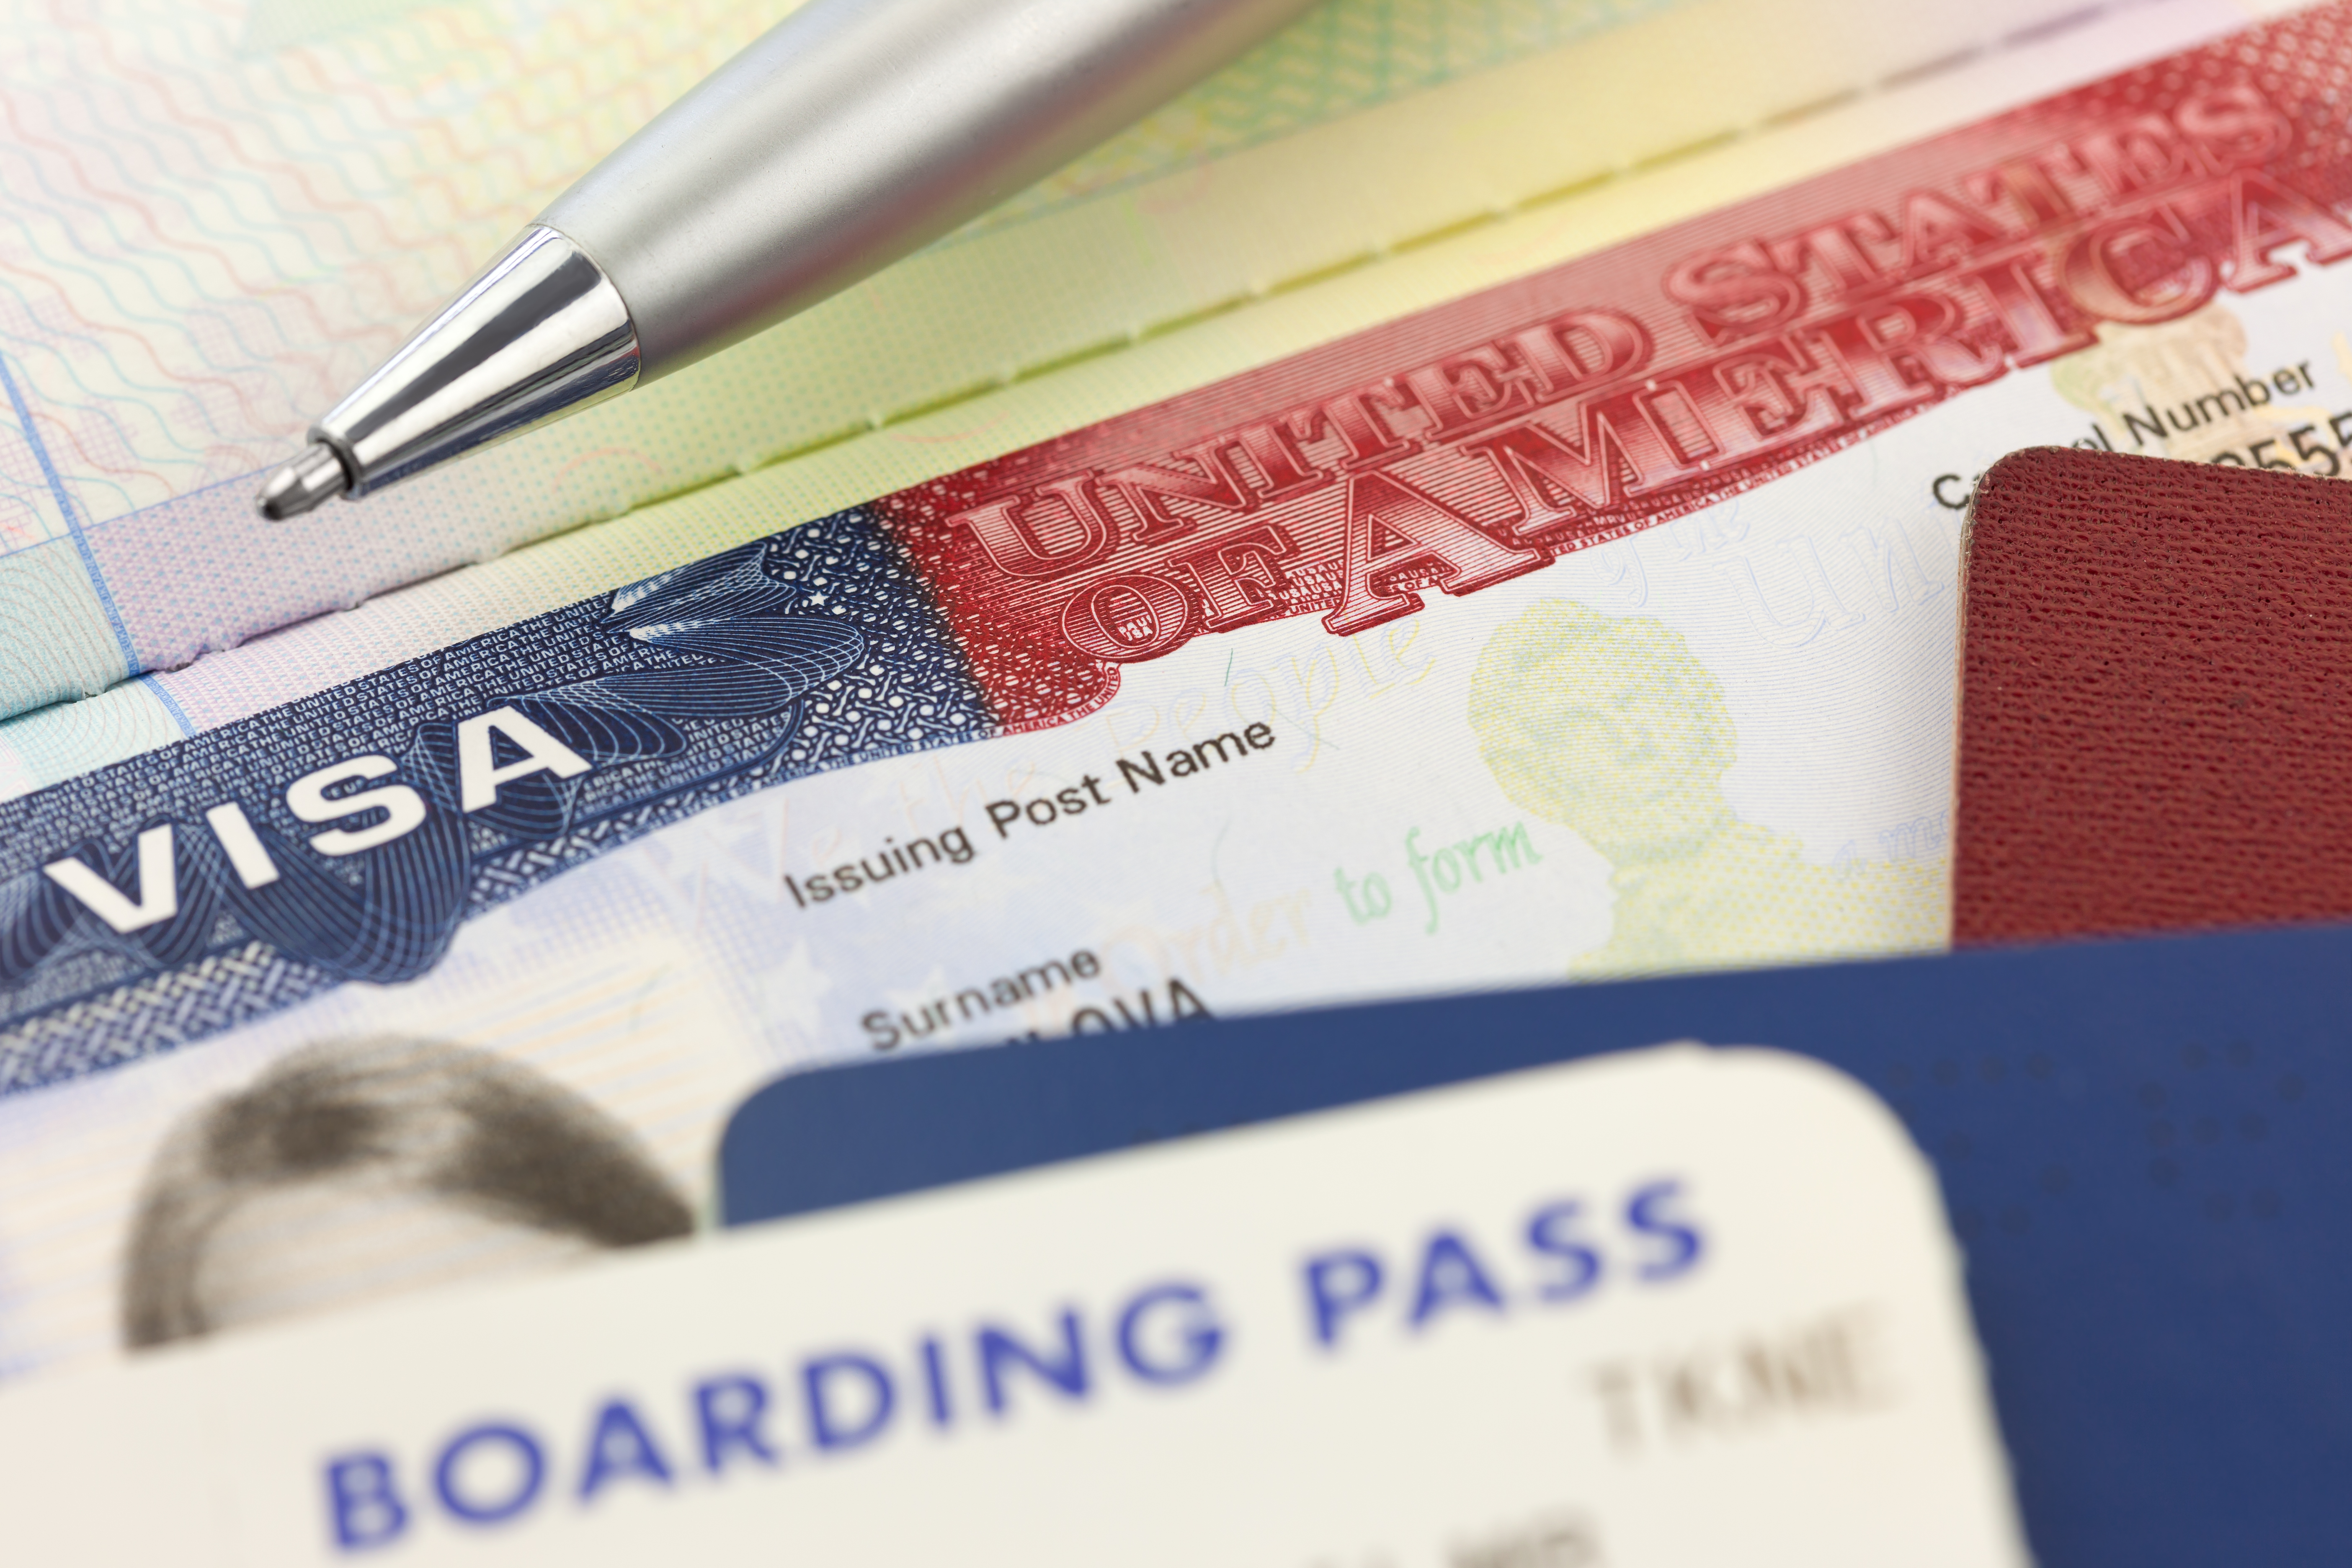 USA Visa, passports, boarding pass and pen - foreign travel background